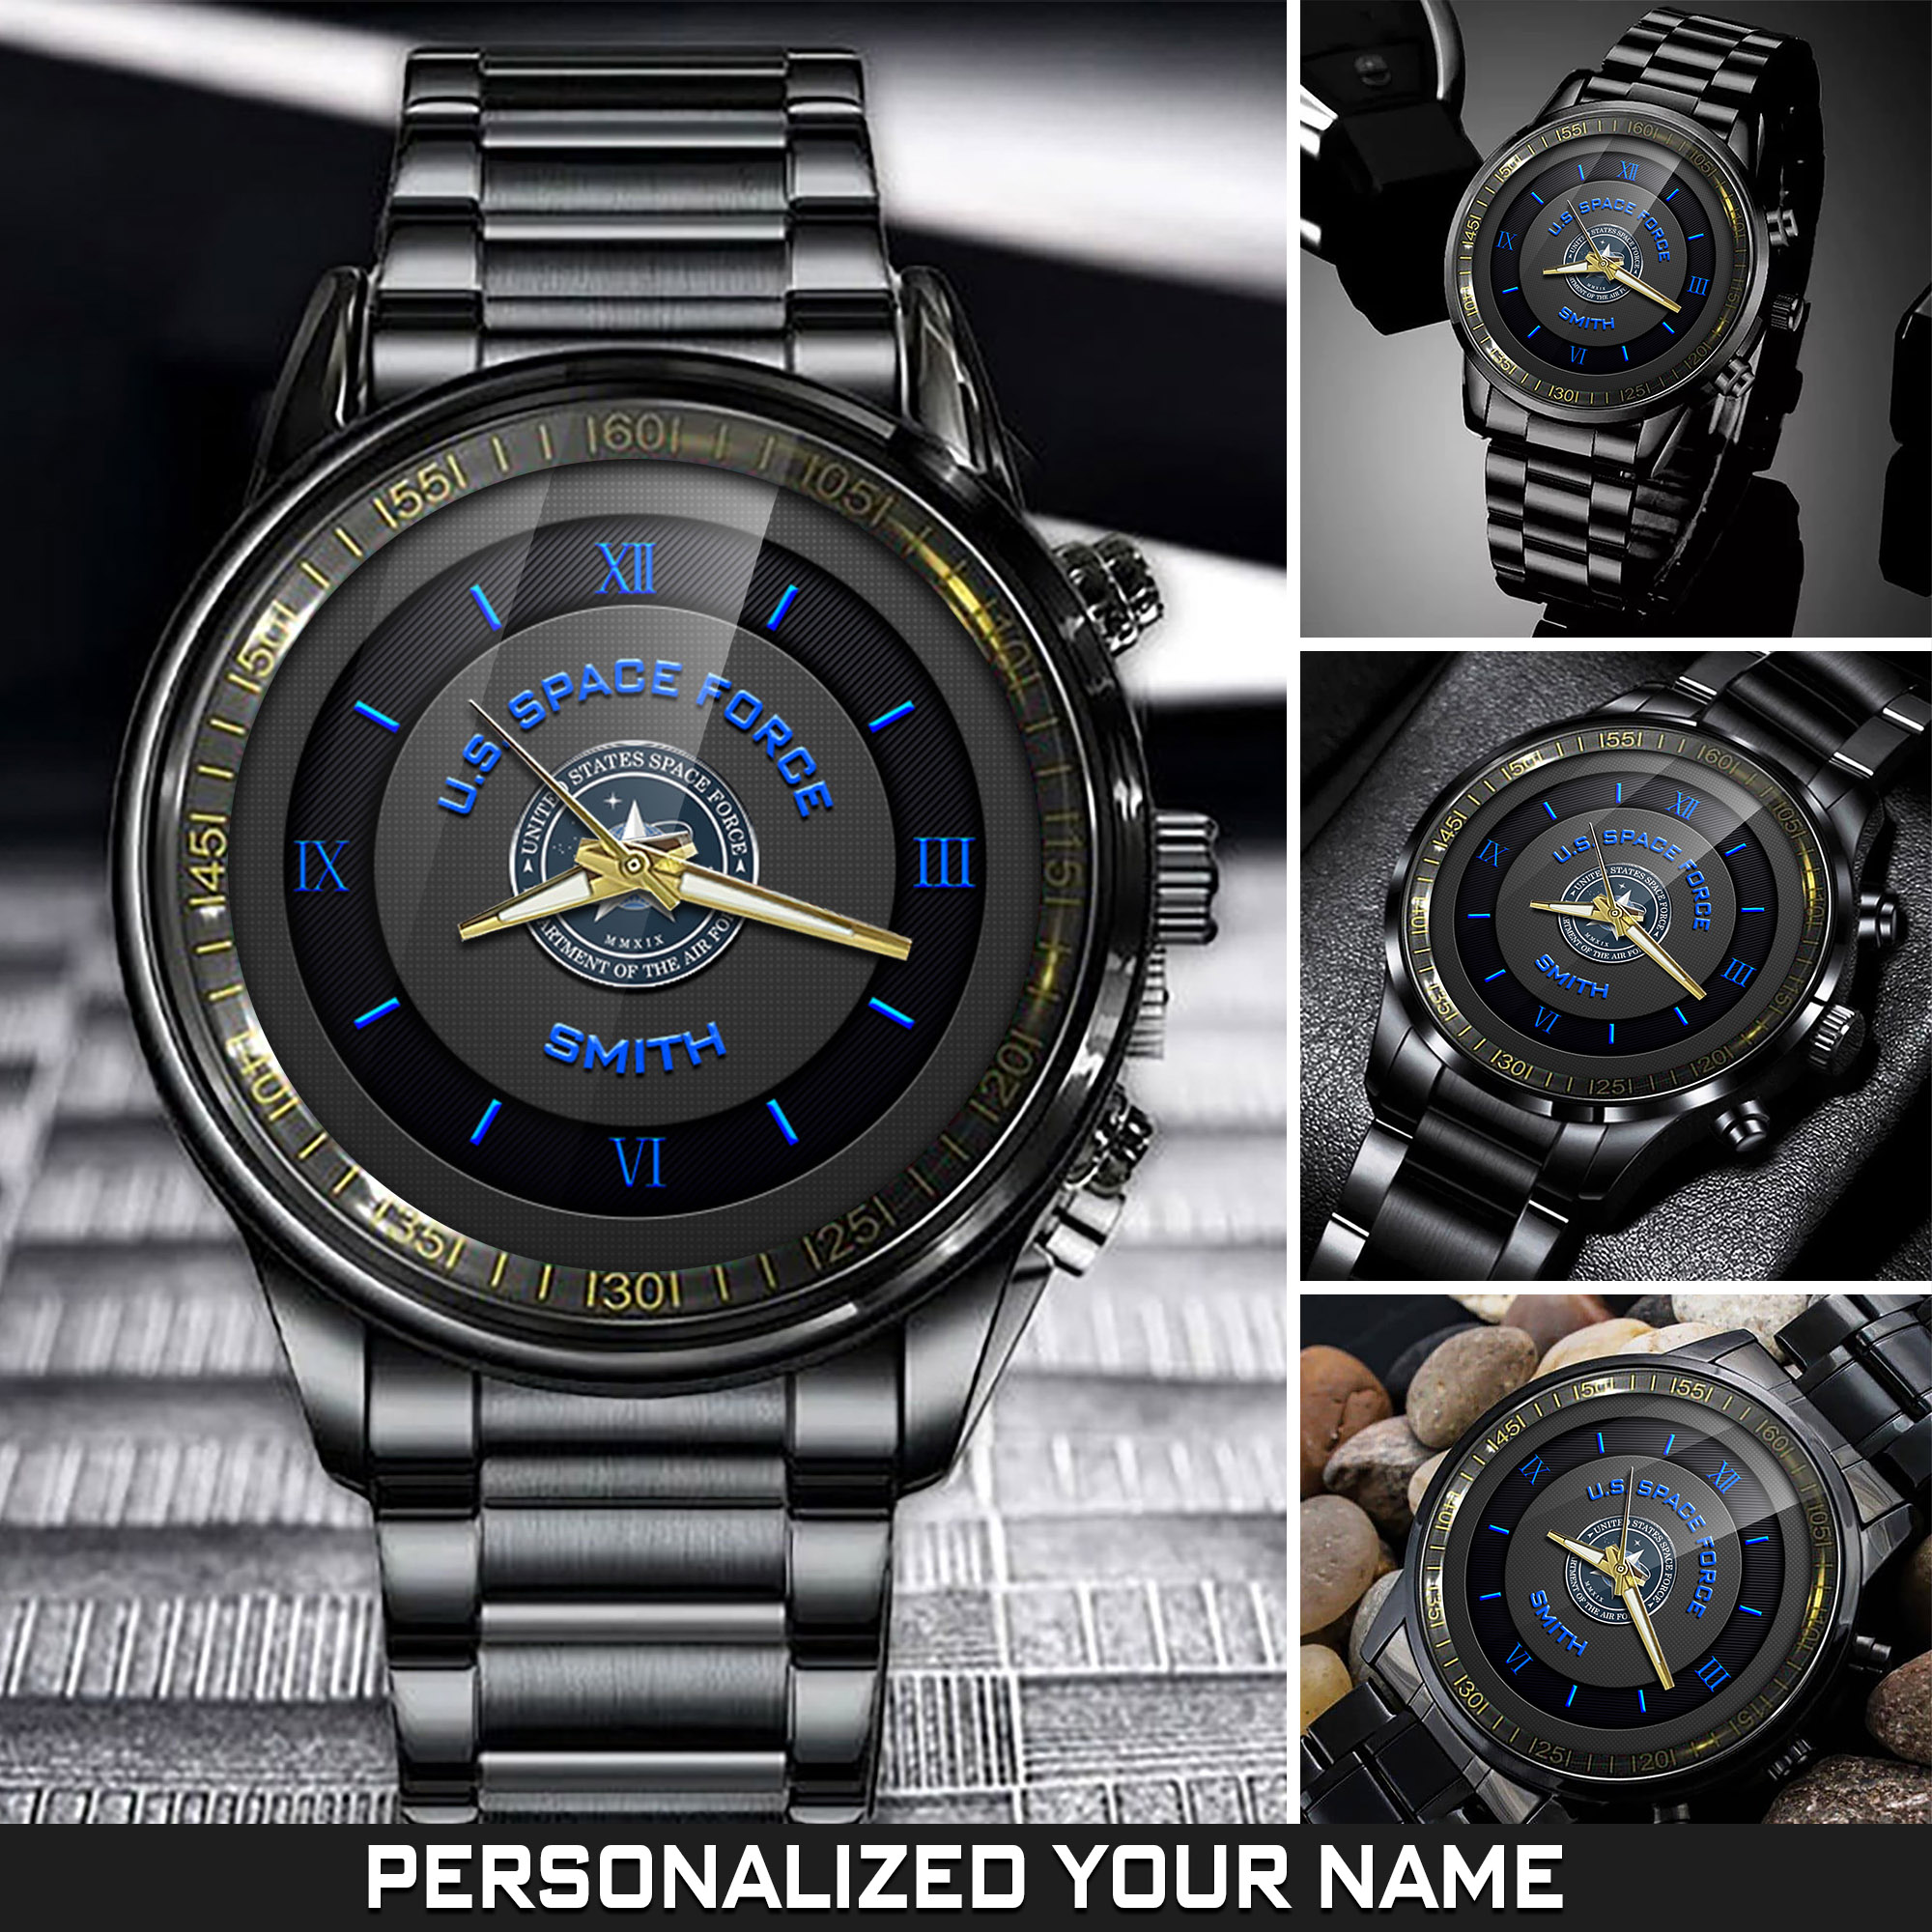 Personalized U.S. Space Force Black Fashion Watch With Your Name, Military Watches, Coast Guard Watches For Men, Gift For Veterans, Soldier Gifts